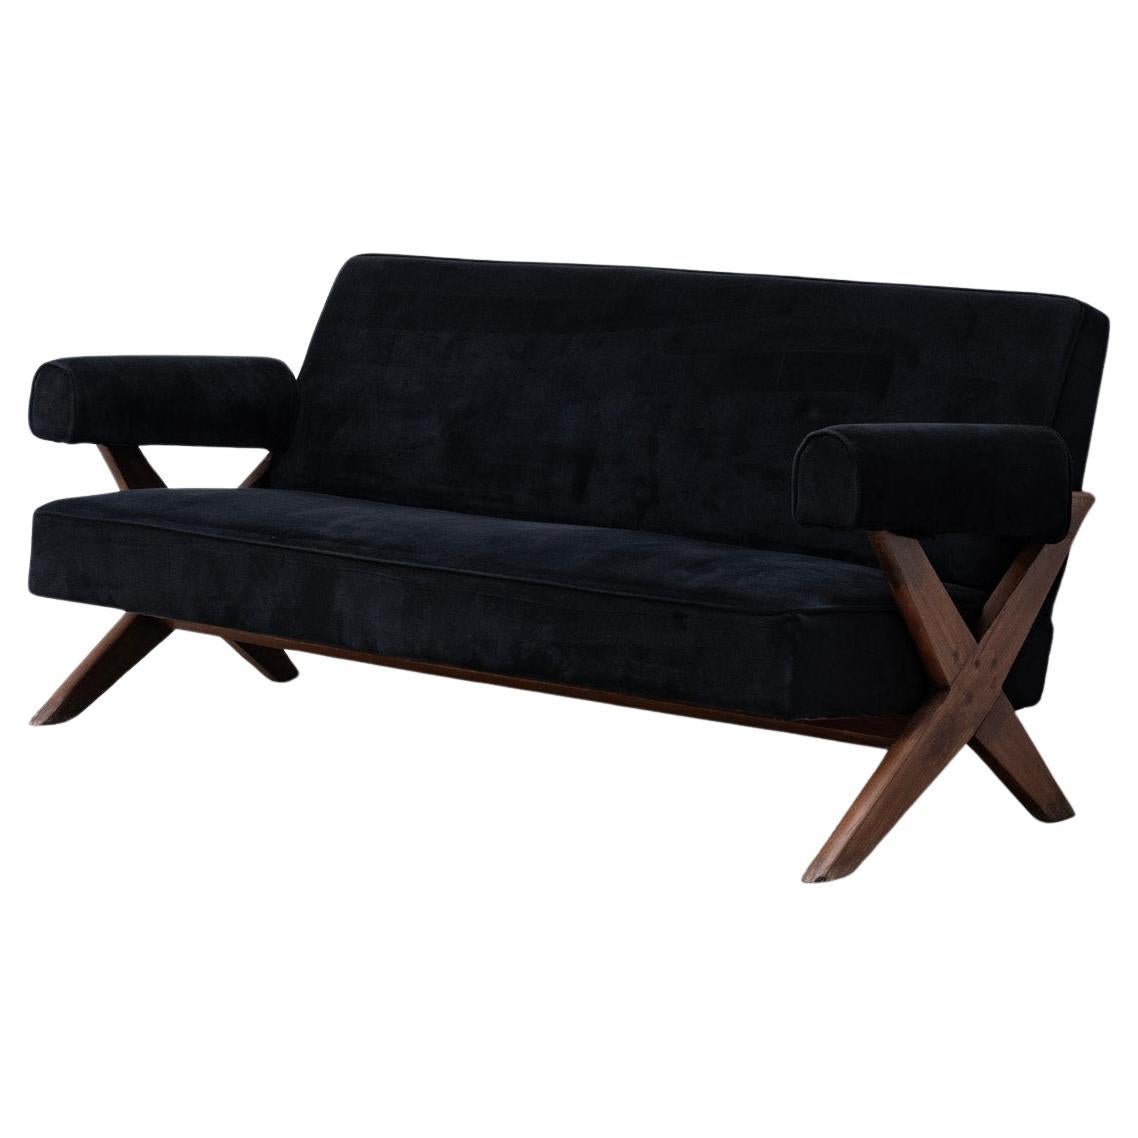 Pierre Jeanneret Vintage Lounge Sofa / Upholstered Sofa / easy chair 